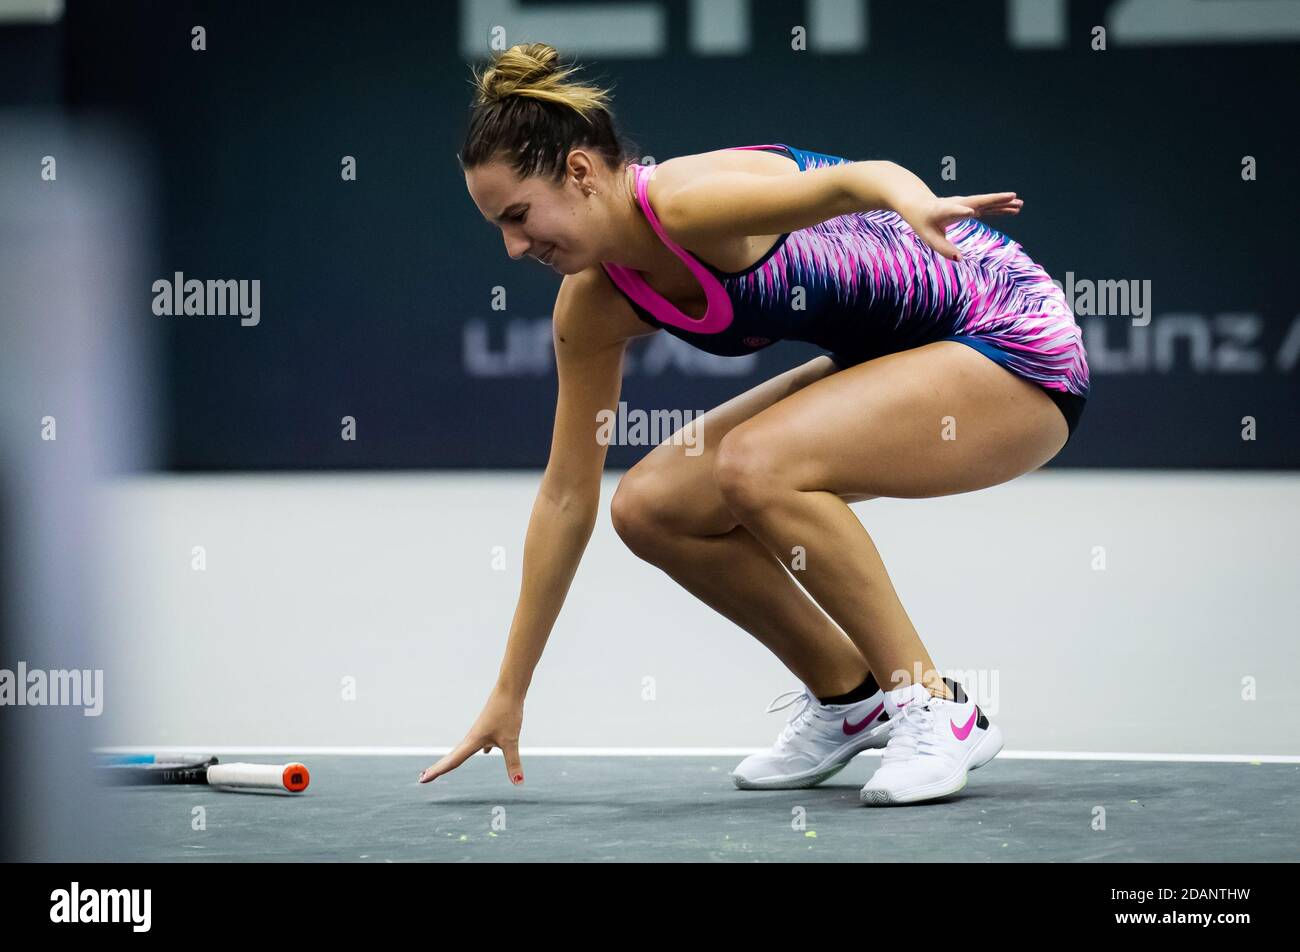 Oceane Dodin of France suffers an ankle injury during the quarter-final  against Aryna Sabalenka of Belarus at the 2020 Upper Austr / LM Stock Photo  - Alamy